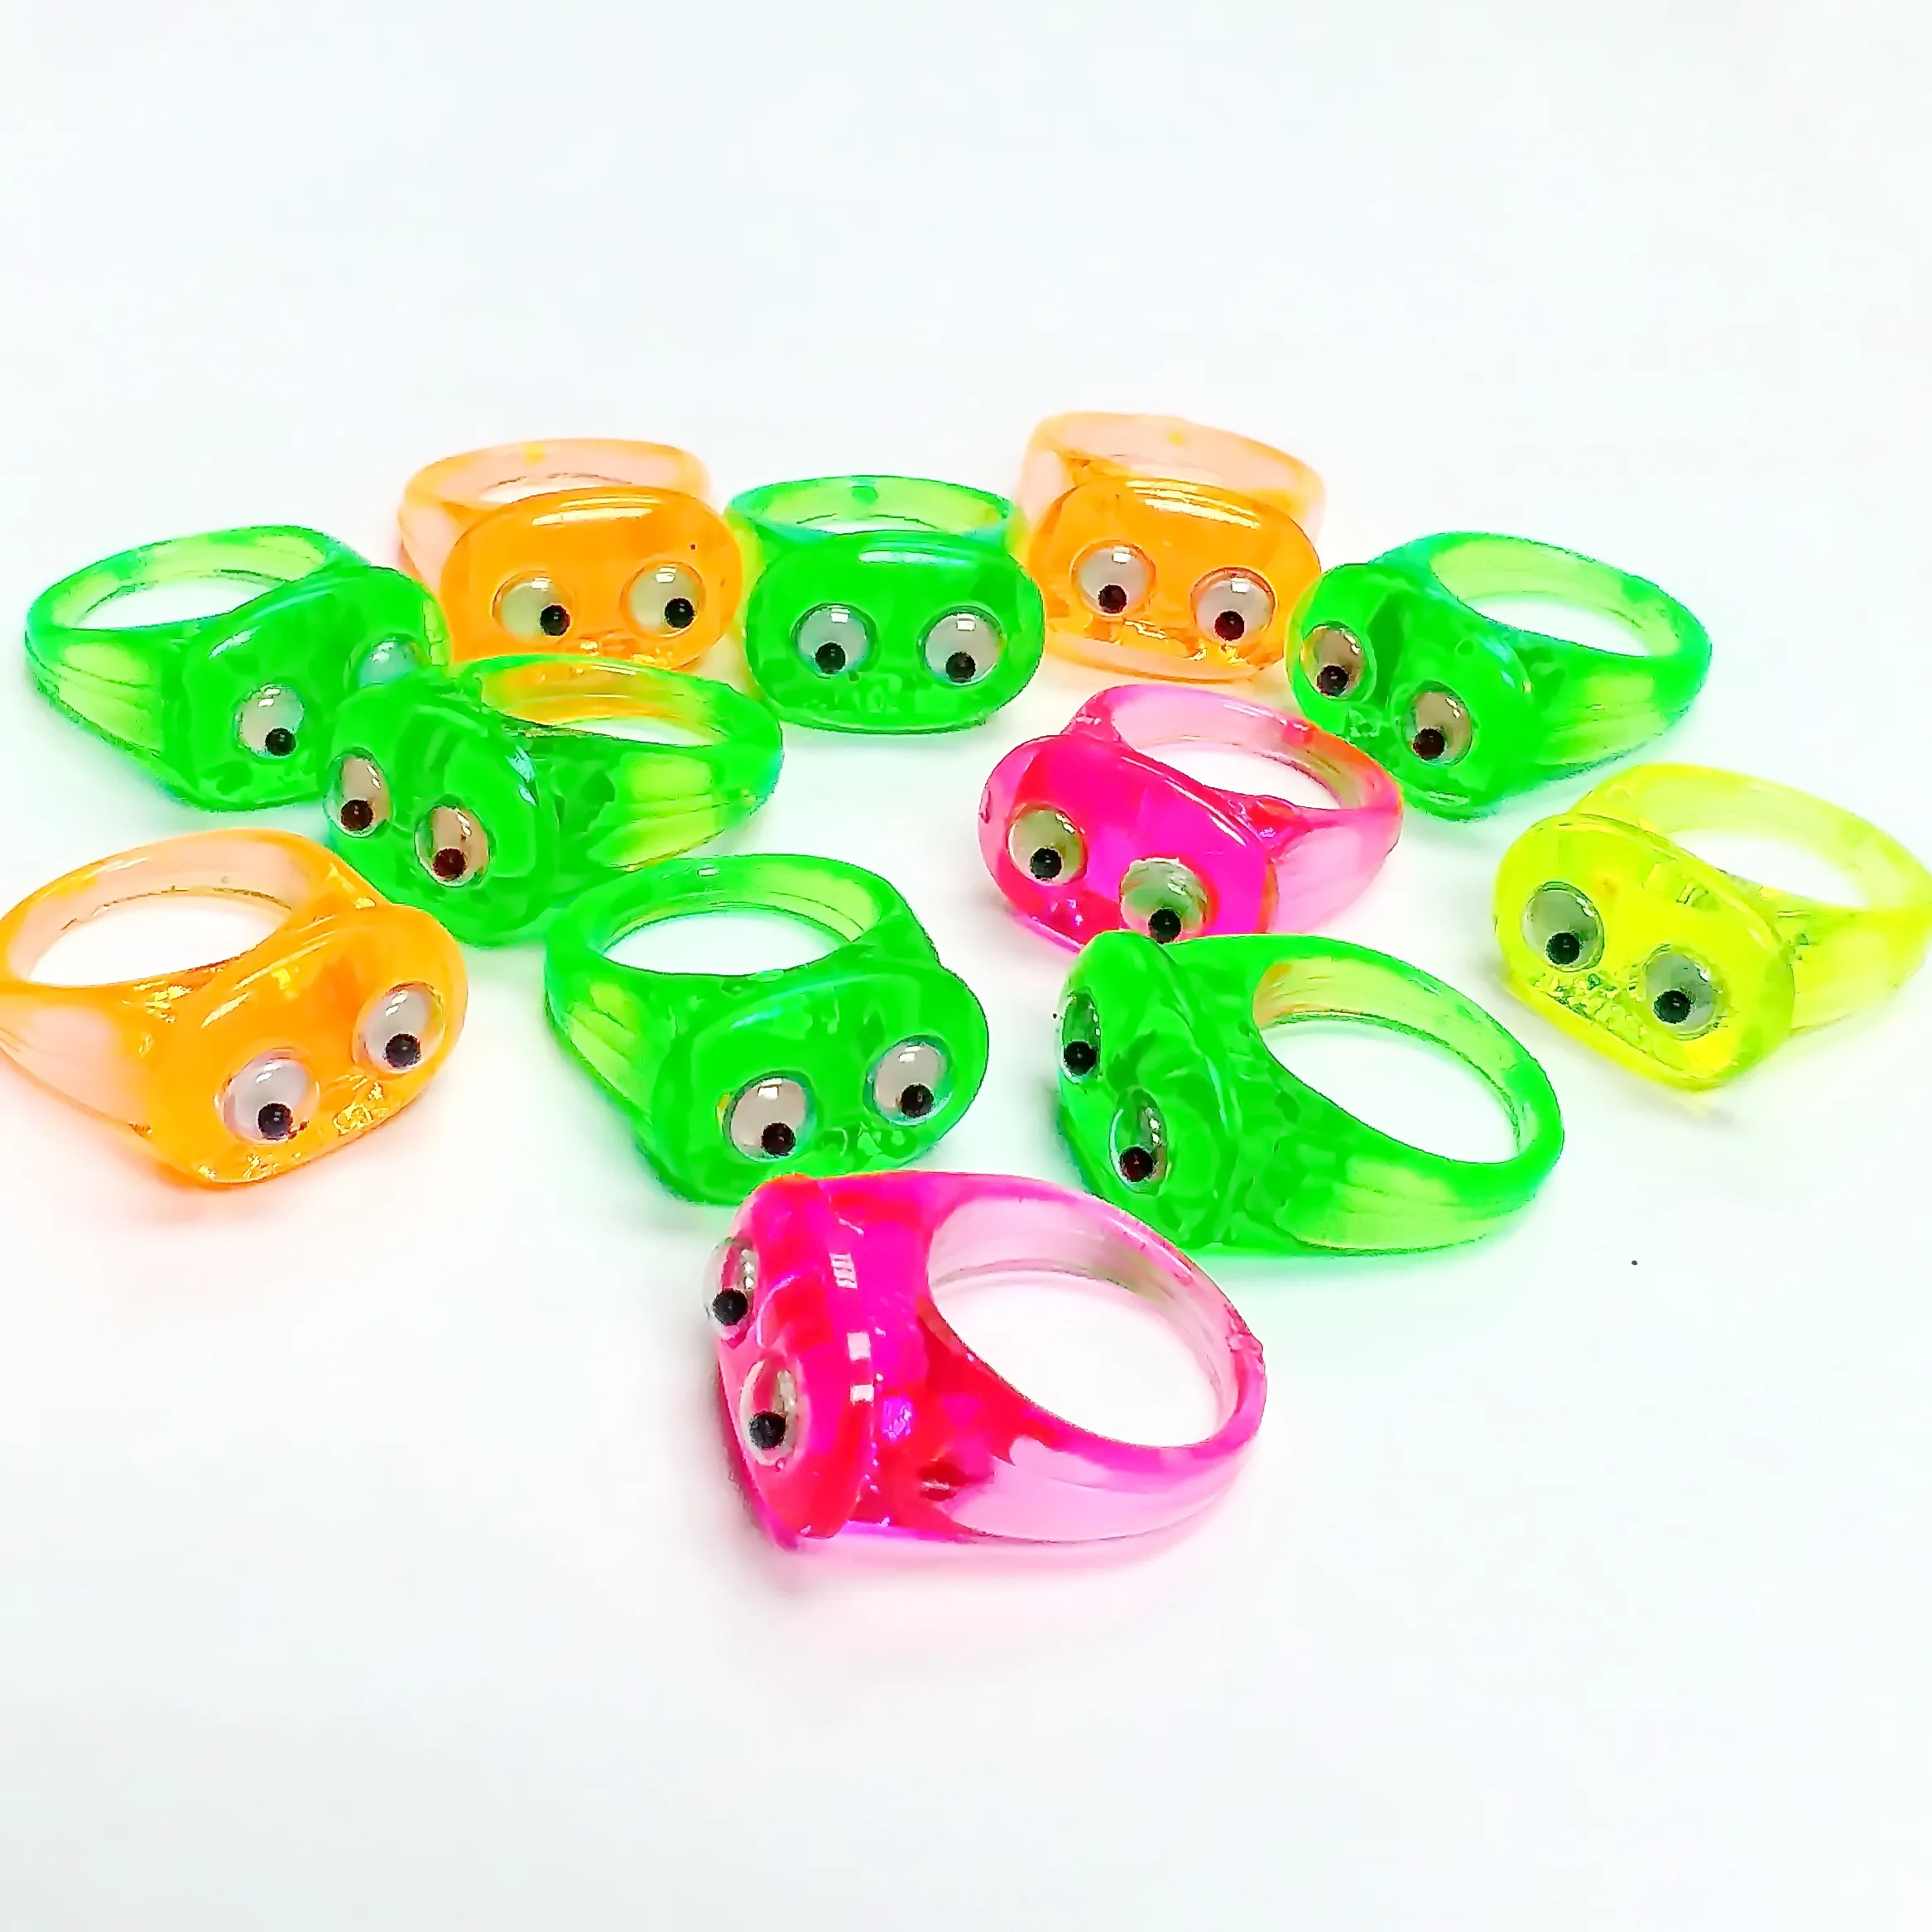 24 pc New Rings Pinata filler Birthday Party Favors Wholesales vending novelty 